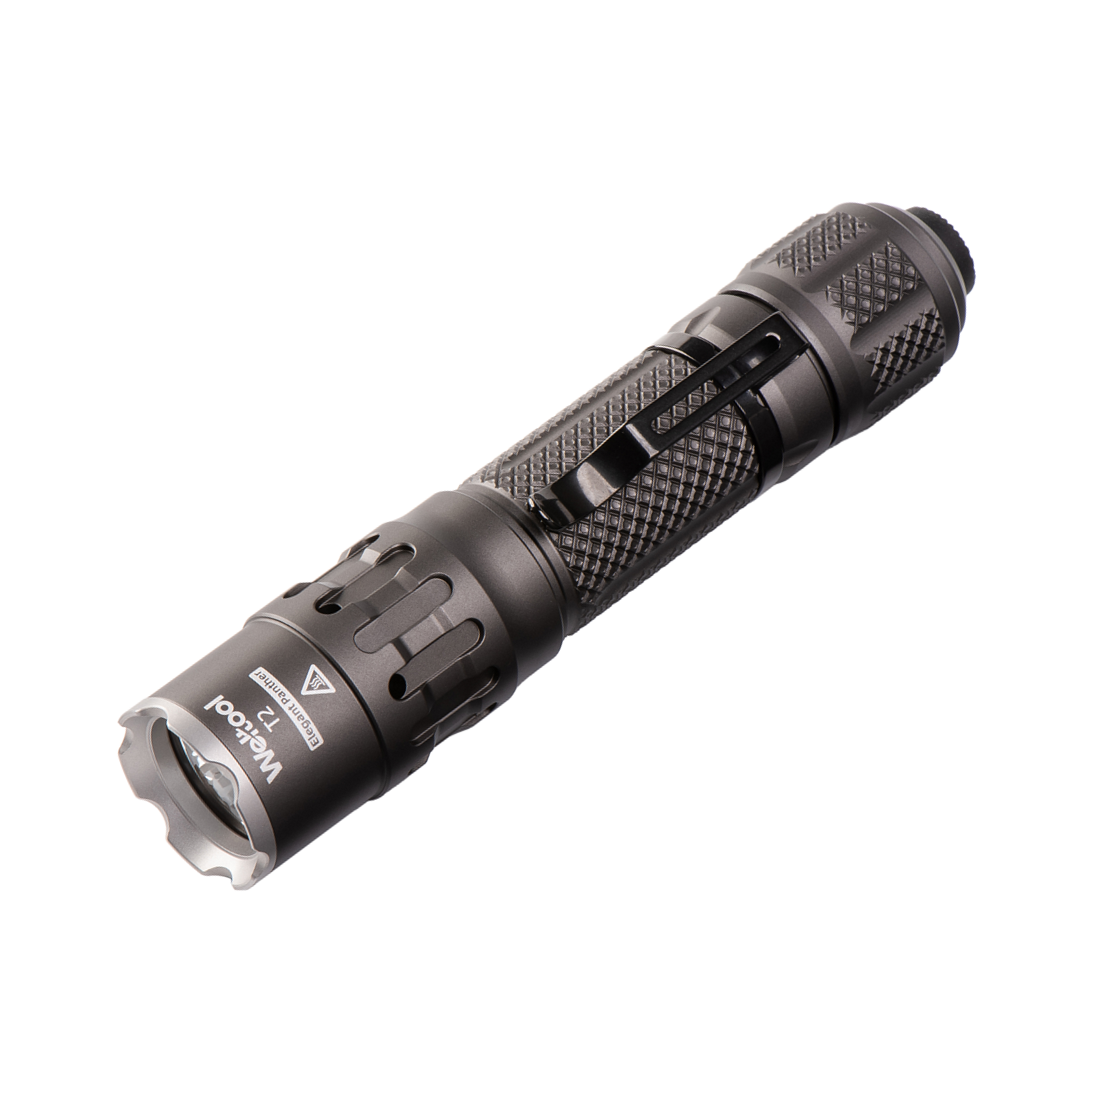 Weltool-T2-quotElegant-Pantherquot-1730LM-Compact-EDC-Tactical-Flashlight-Come-with-18650-Battery-Mi-1962931-1